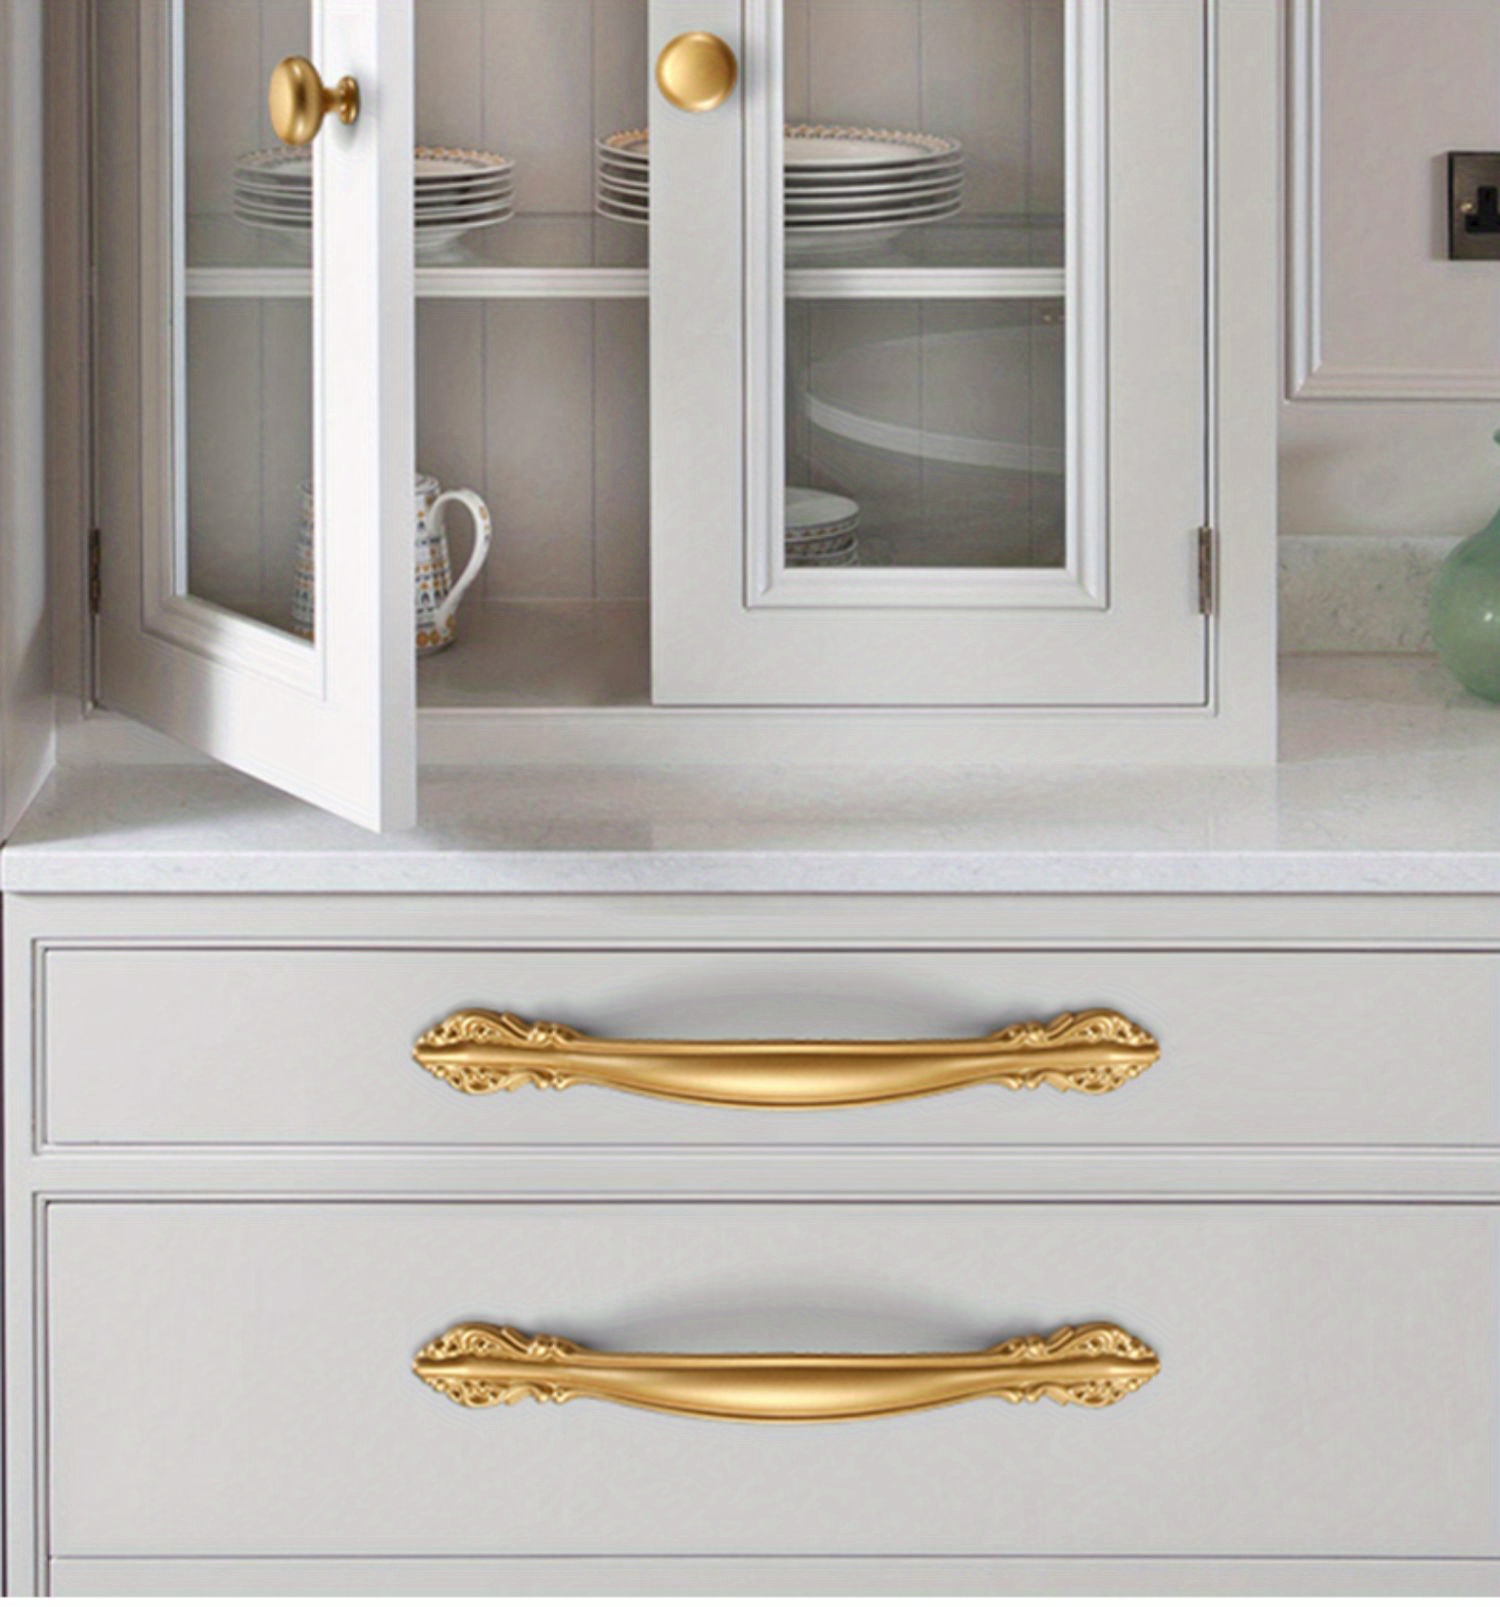 Cabinet Handles Golden Wardrobe Drawer Handles Modern Simple Household  Cabinet Doors American and European Single Hole Small Handles A34 